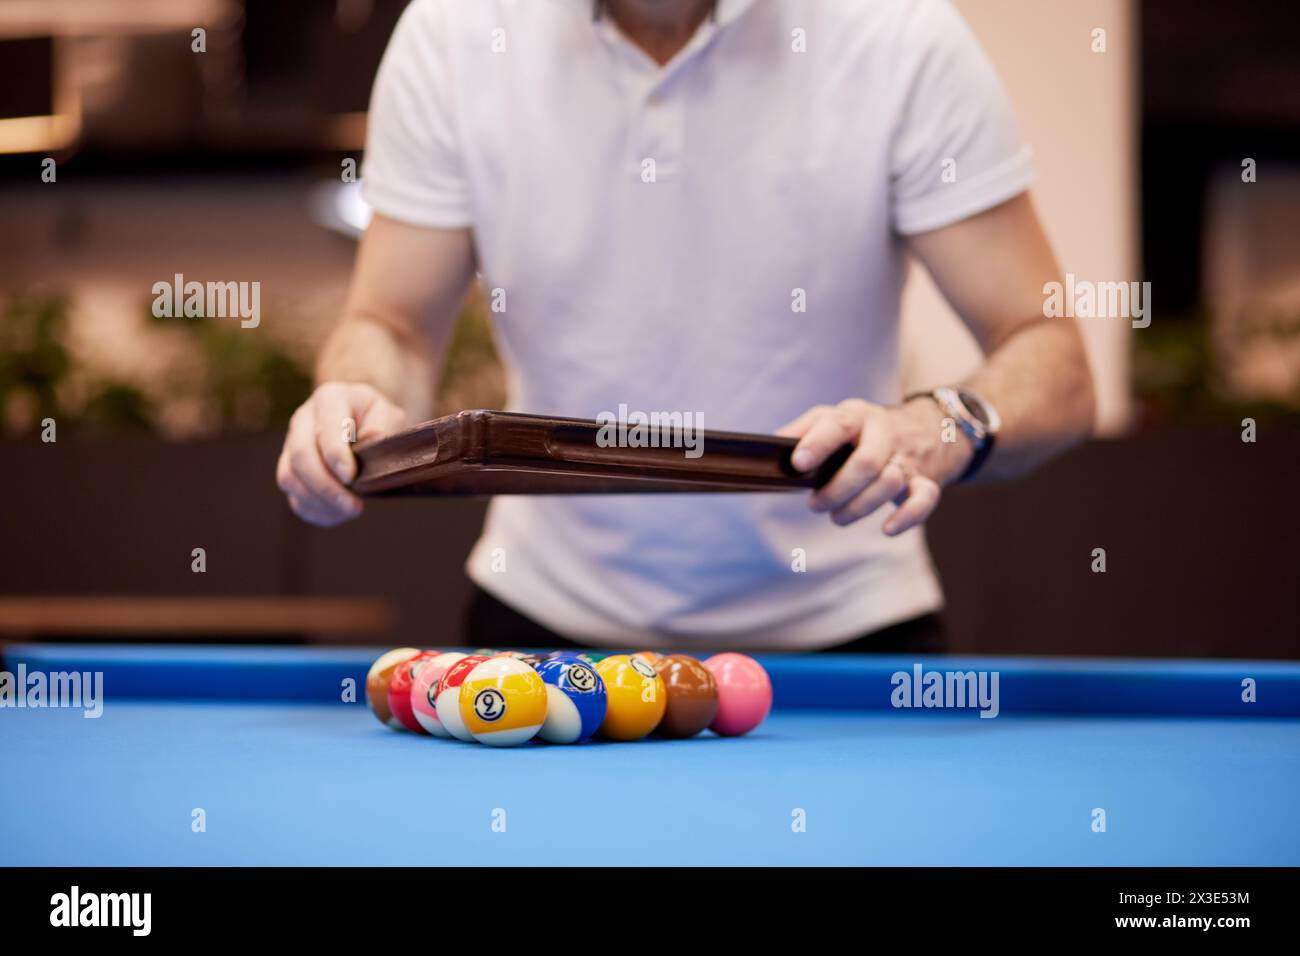 Man in white shirt arranges pool balls on table in club. Stock Photo